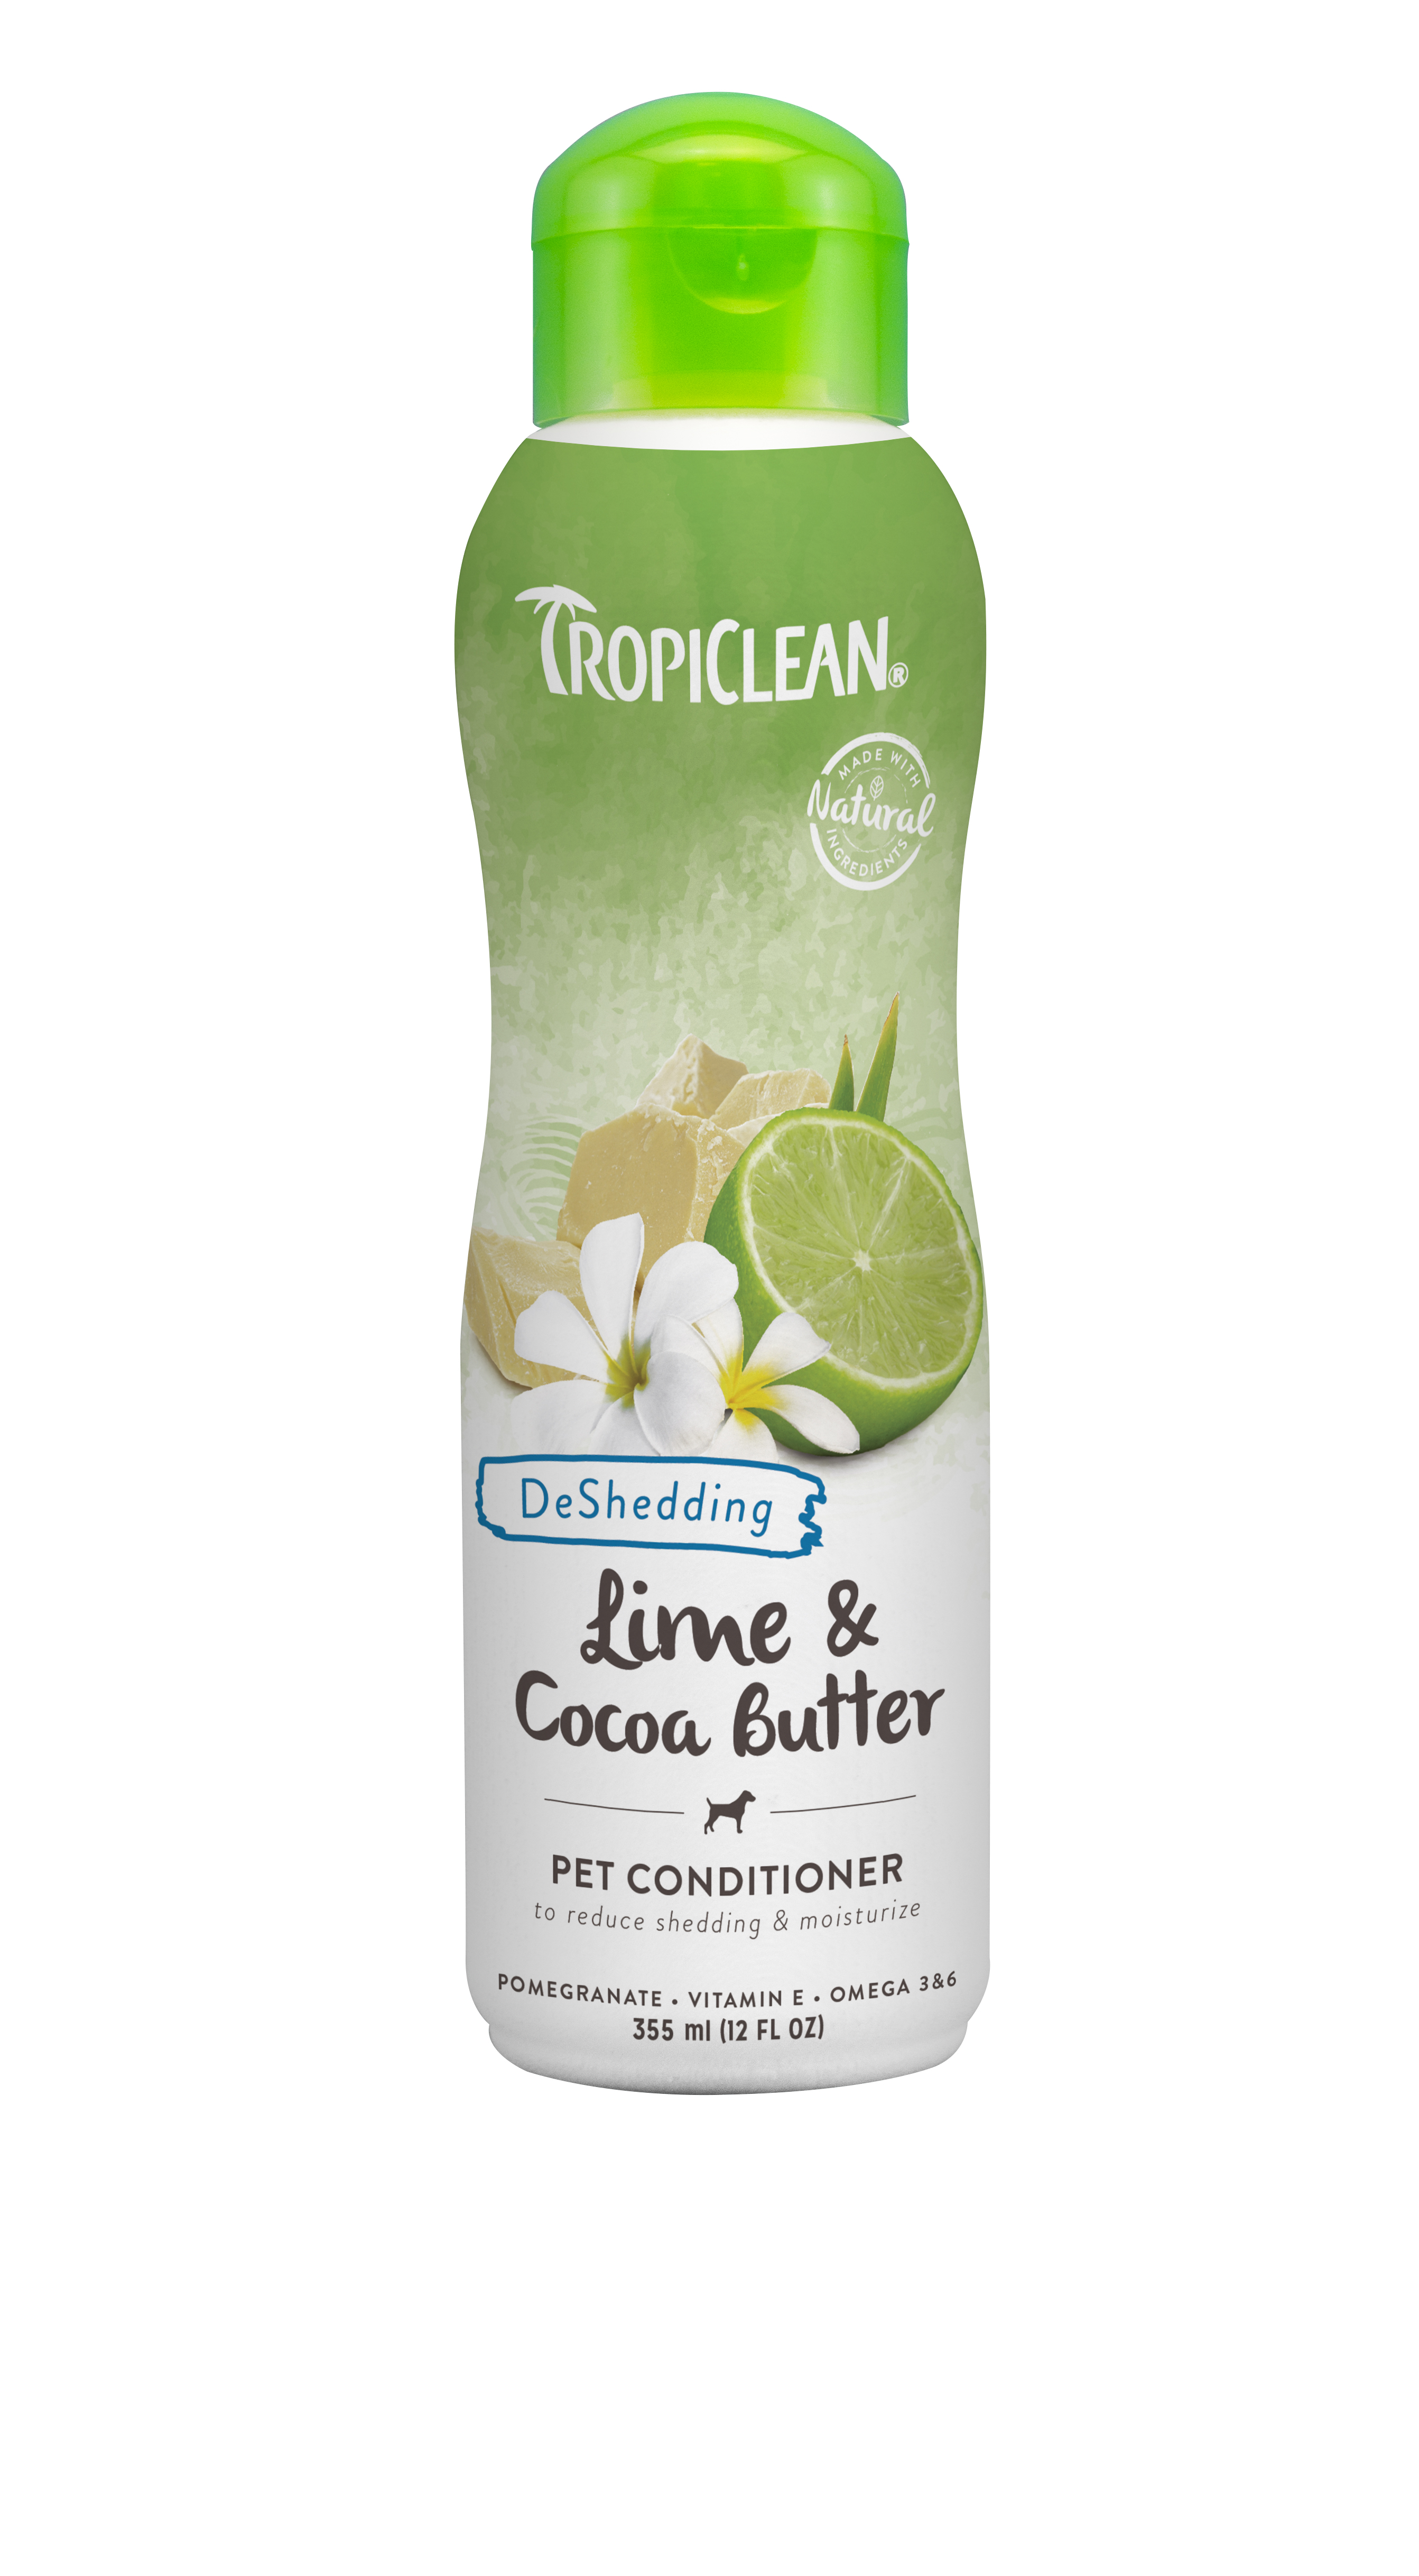 Tropiclean Lime and Cocoa Butter Conditioner (Deshedding)